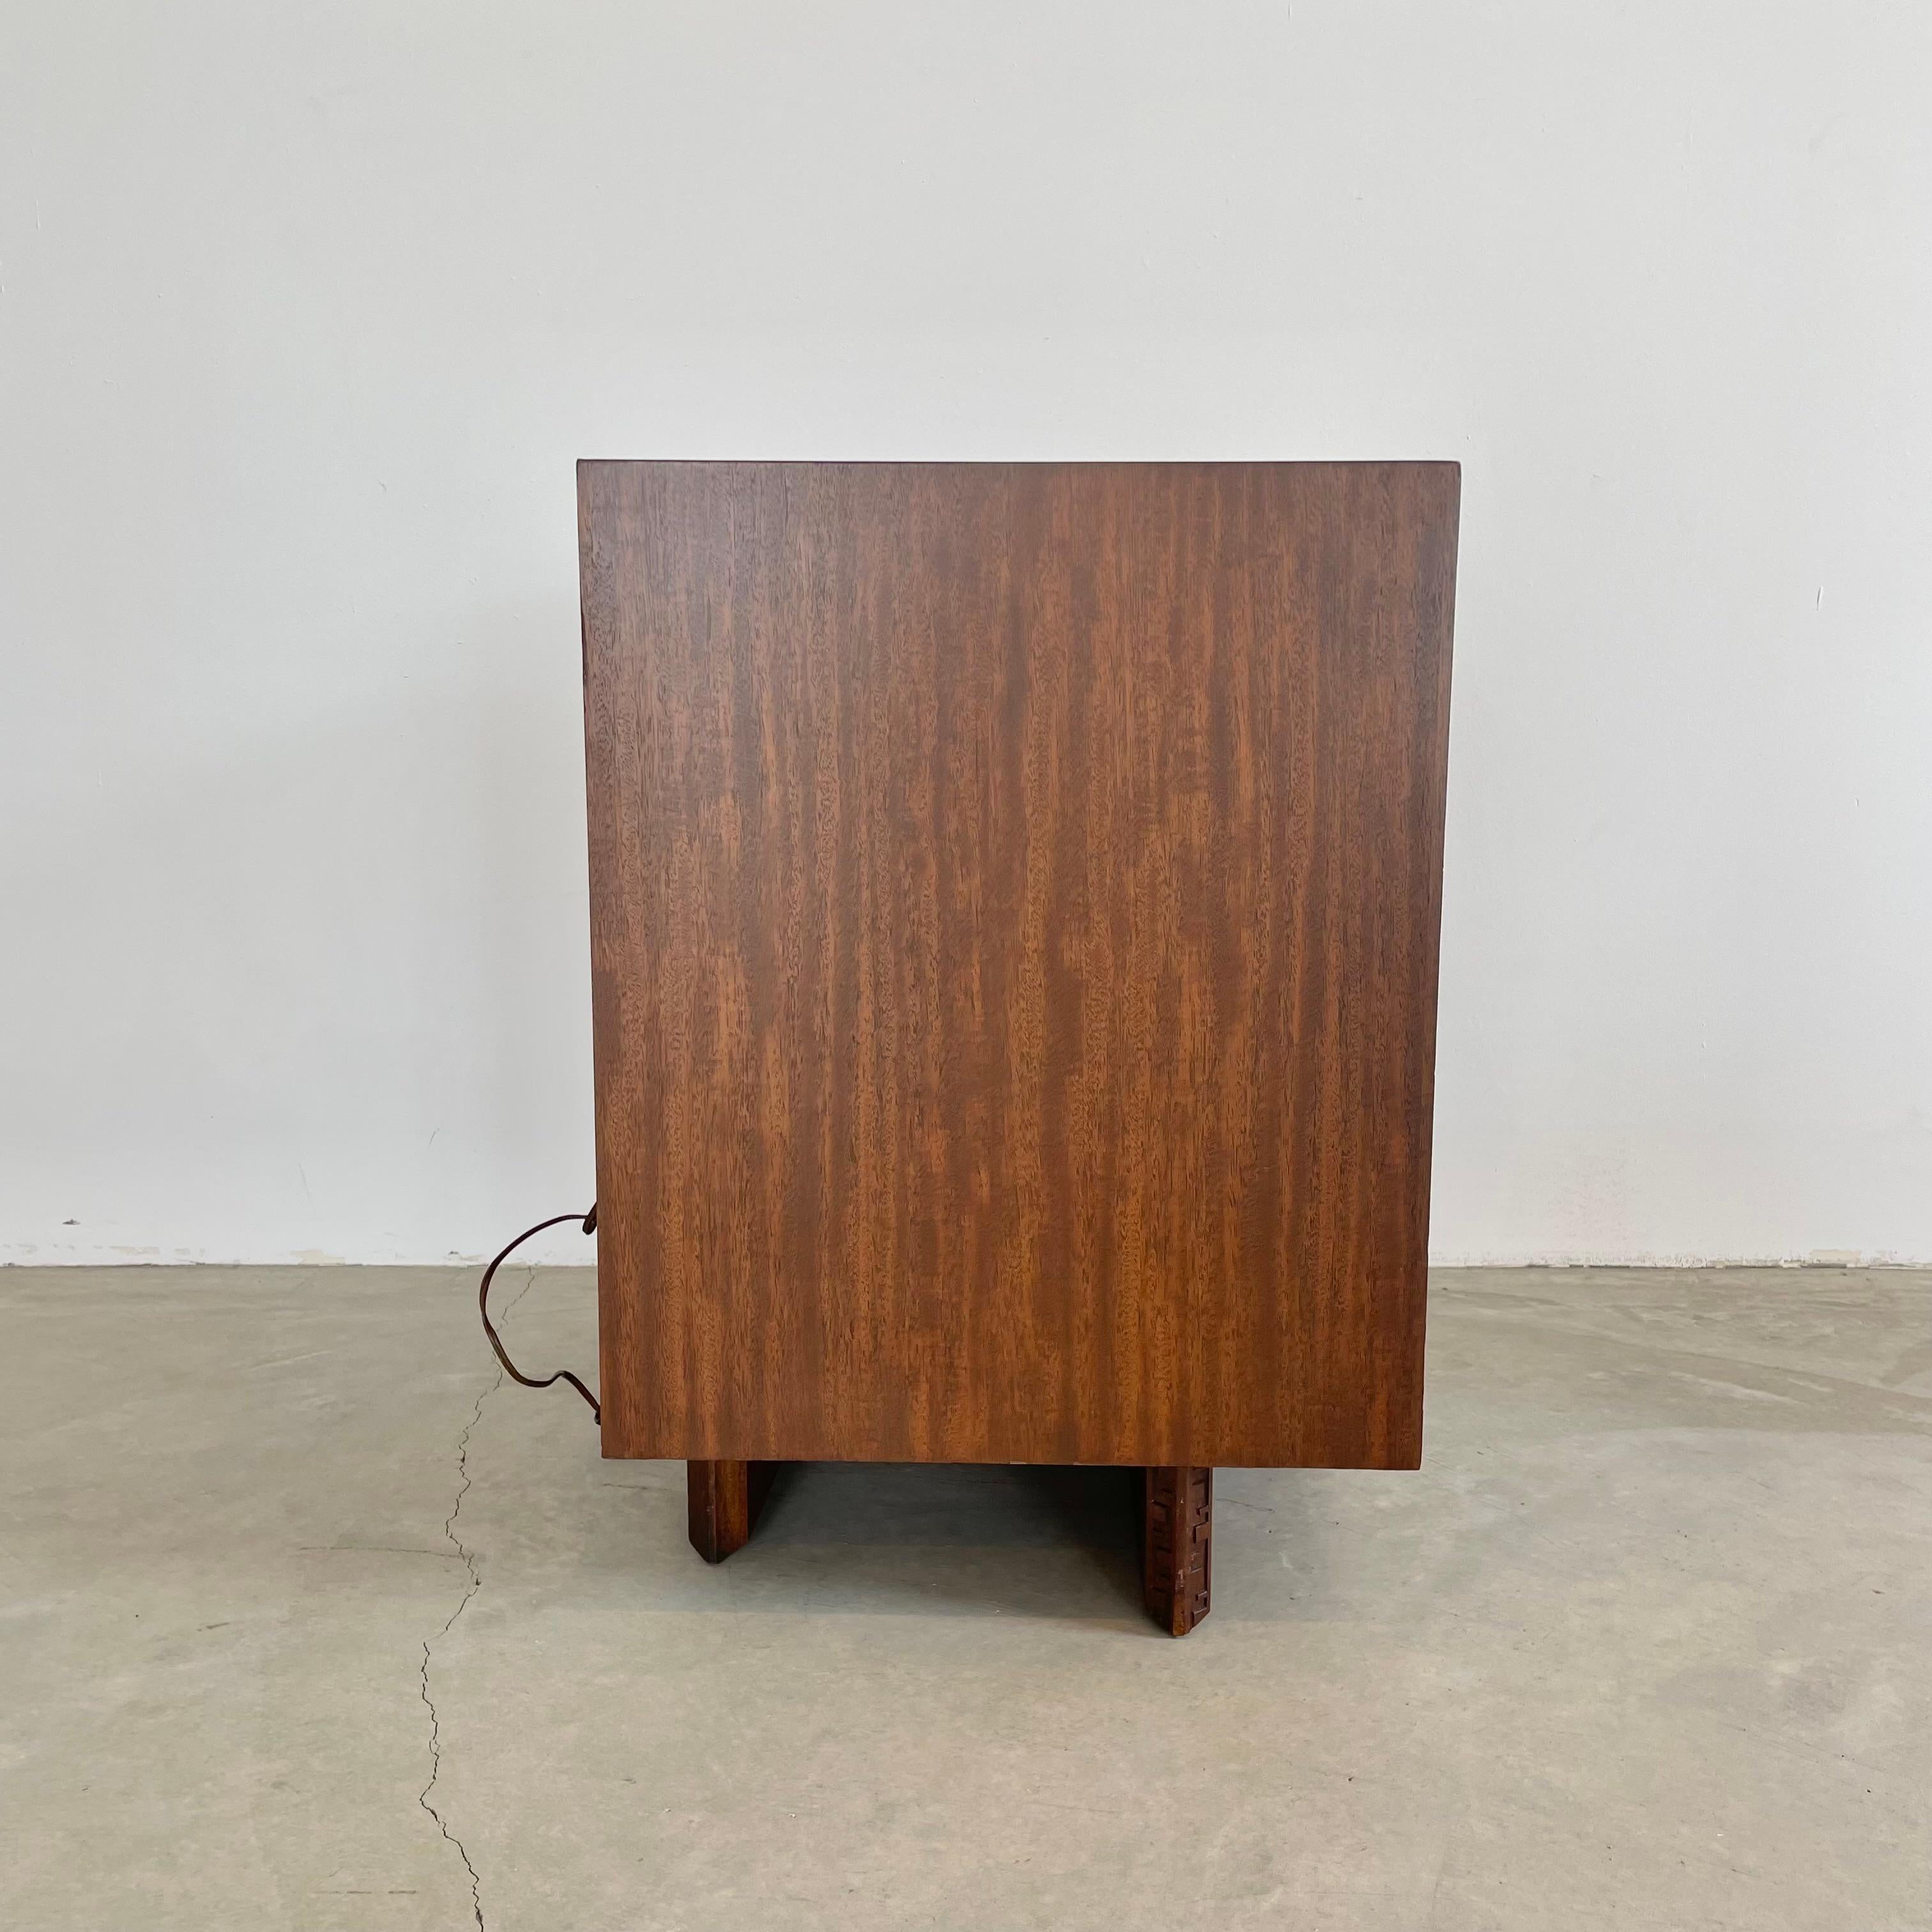 Mahogany Frank Lloyd Wright “Taliesin” Nightstand/Side Table for Heritage-Henredon, 1955 For Sale